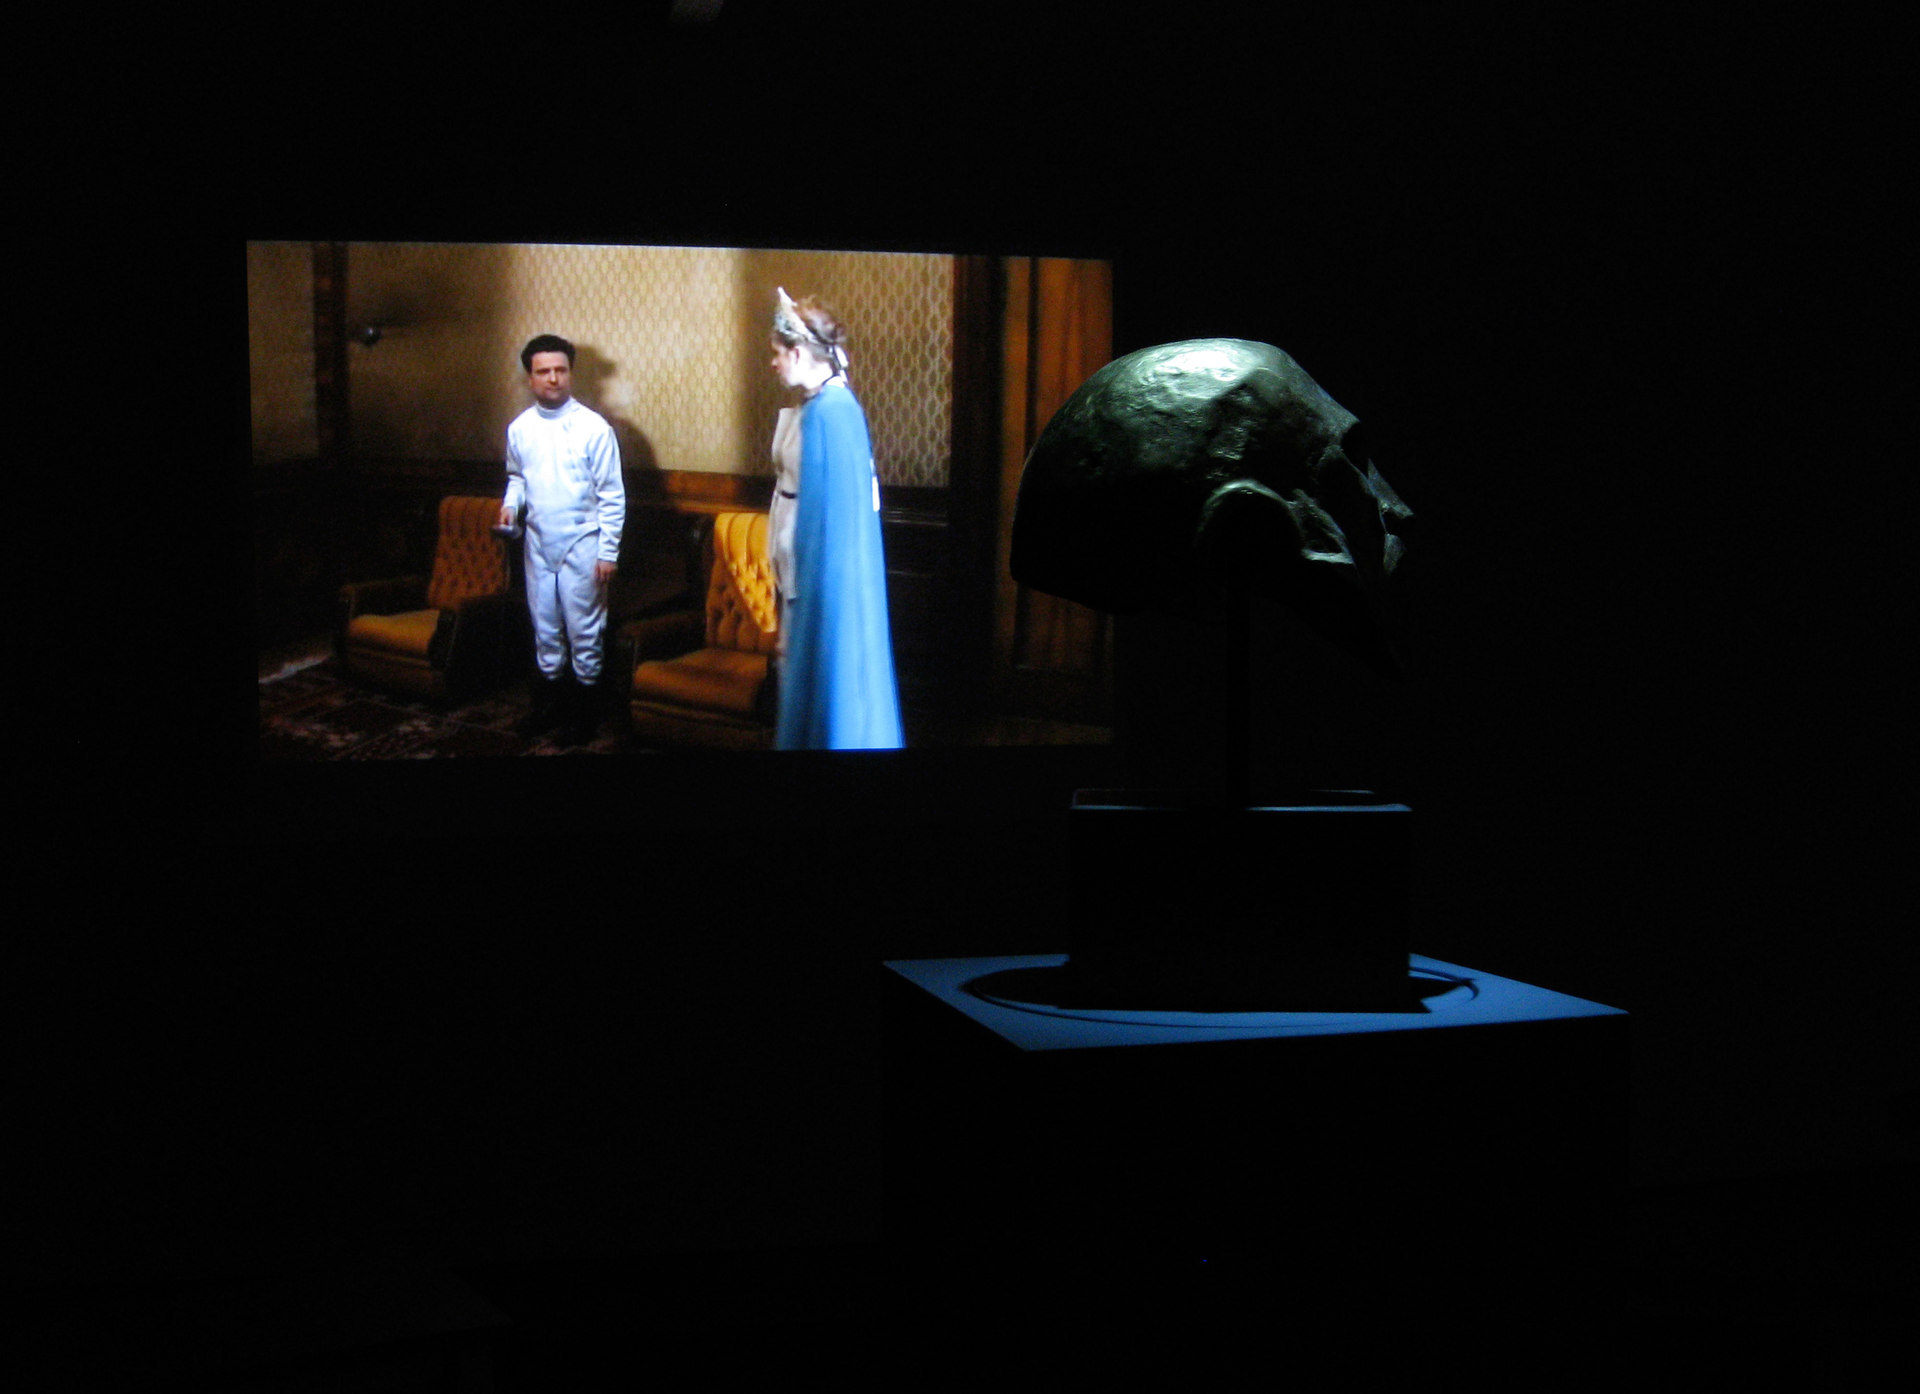 Mark Aerial Waller, 'Domination' still from Resistance Domination Secret, 2010, Cell Project Space